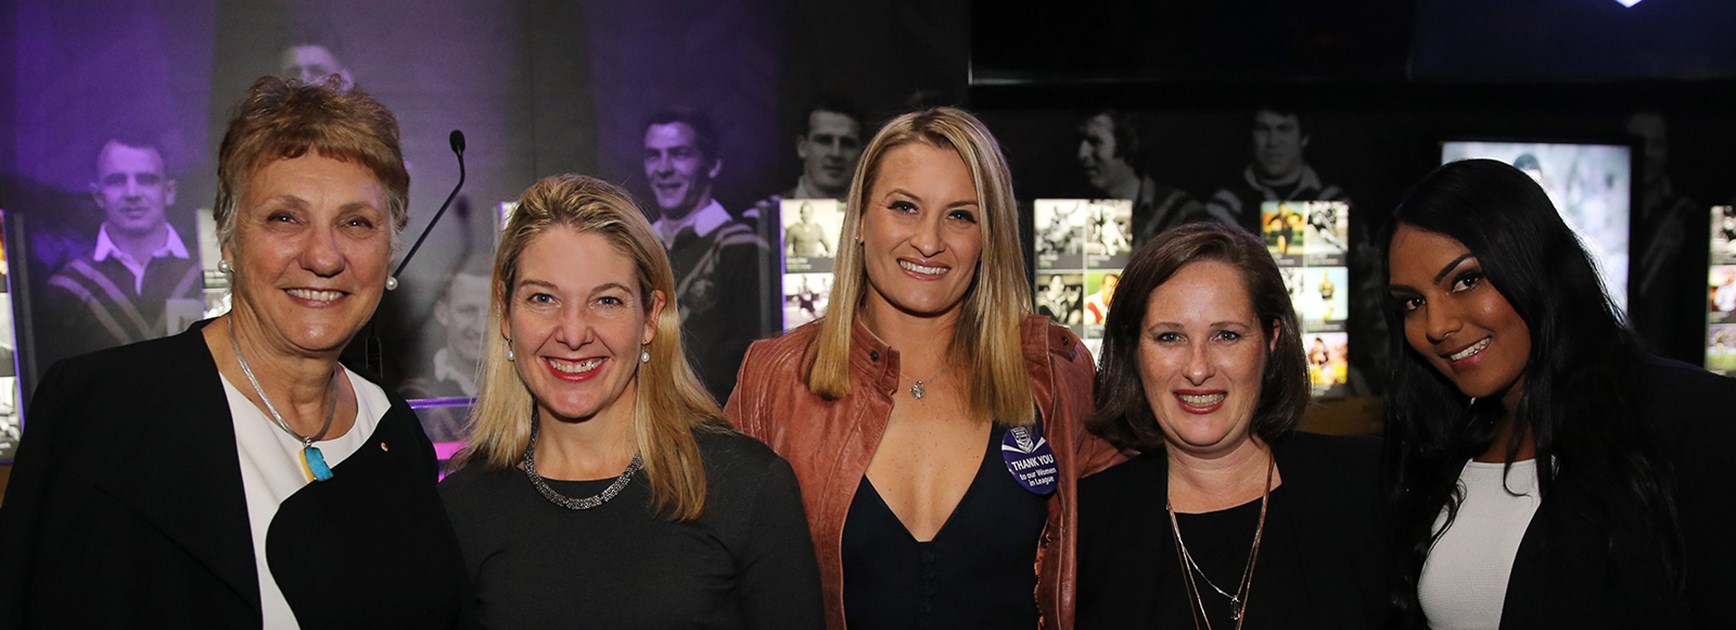 Catherine Harris, Suzanne Young, Ruan Sims, Stephanie Crockford and Mahalia Murphy at the Rugby League Museum.